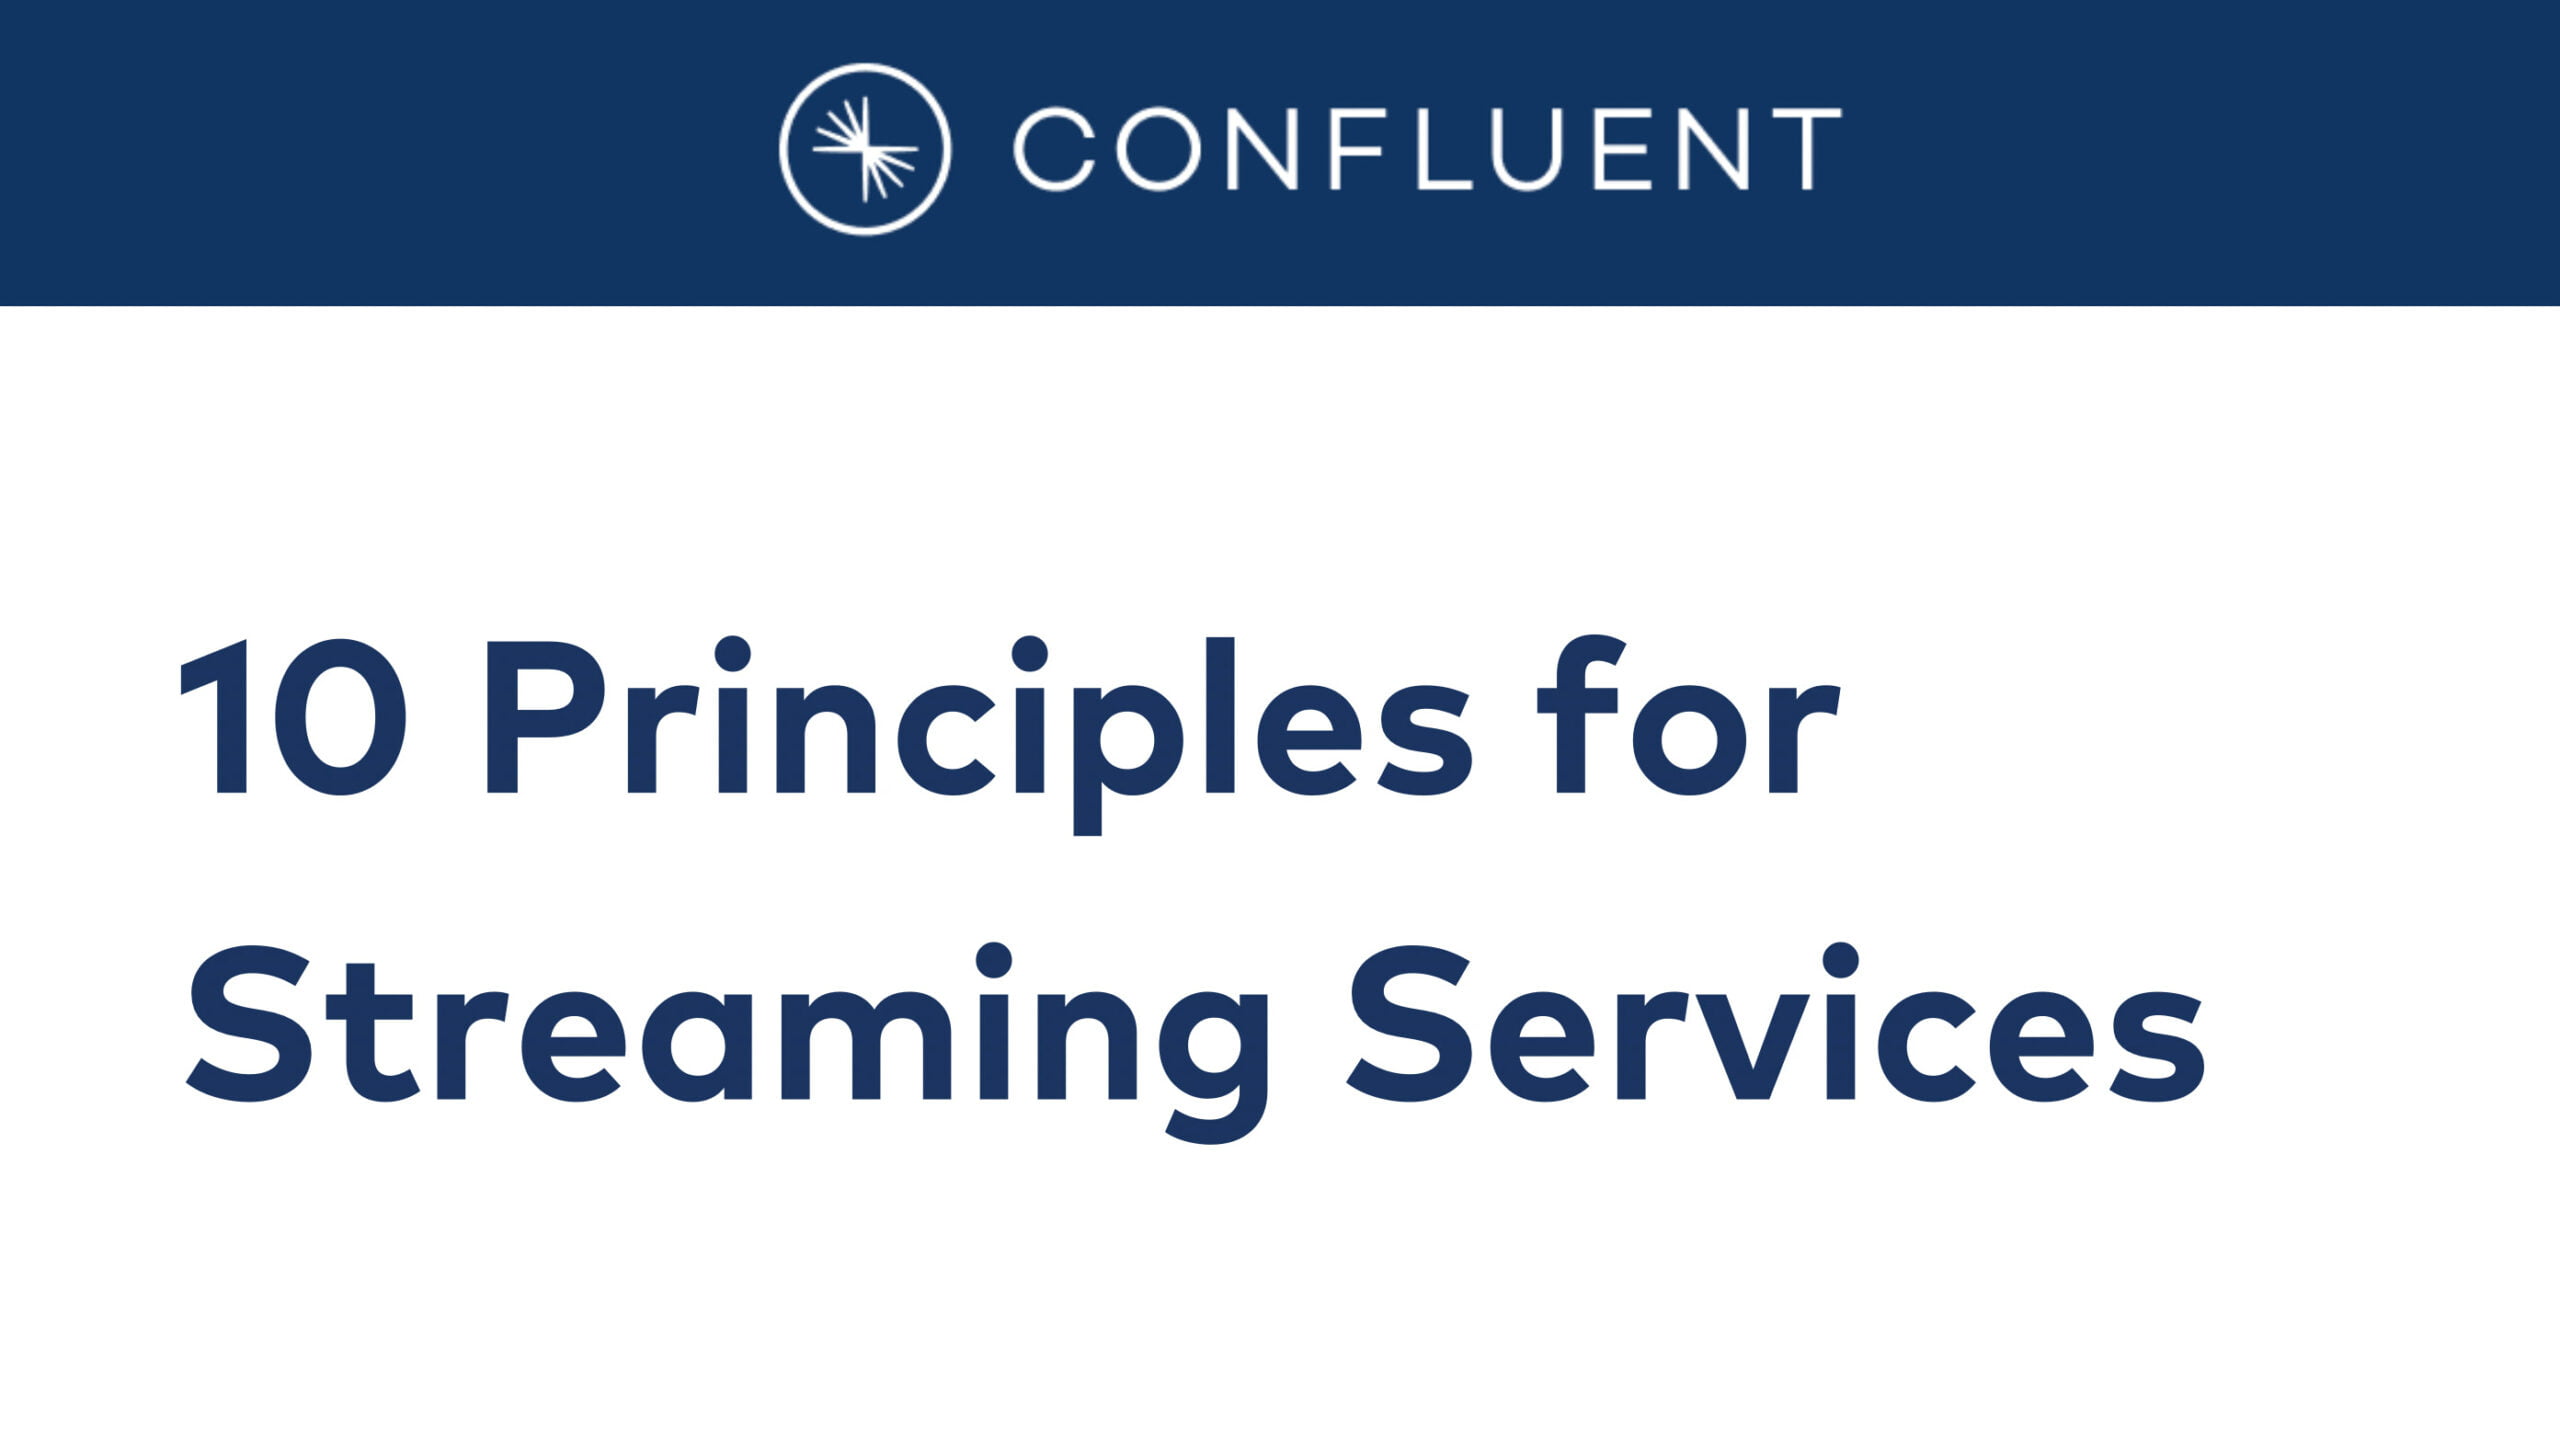 10 Principles for Streaming Services